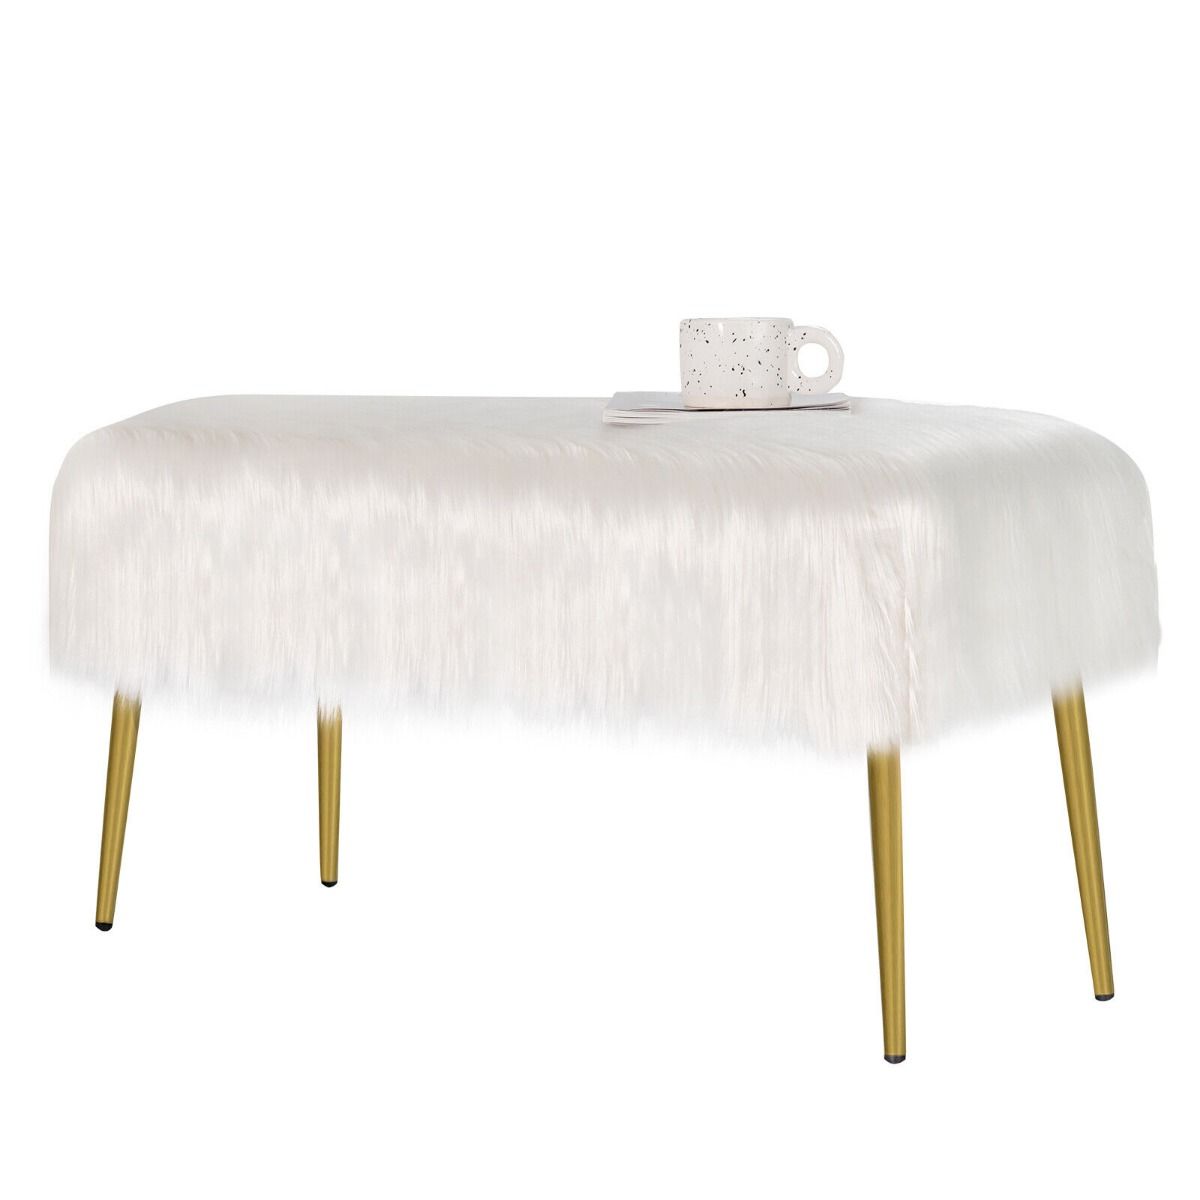 Rectangular Upholstered Furry Faux Fur Footrest with Golden Metal Legs